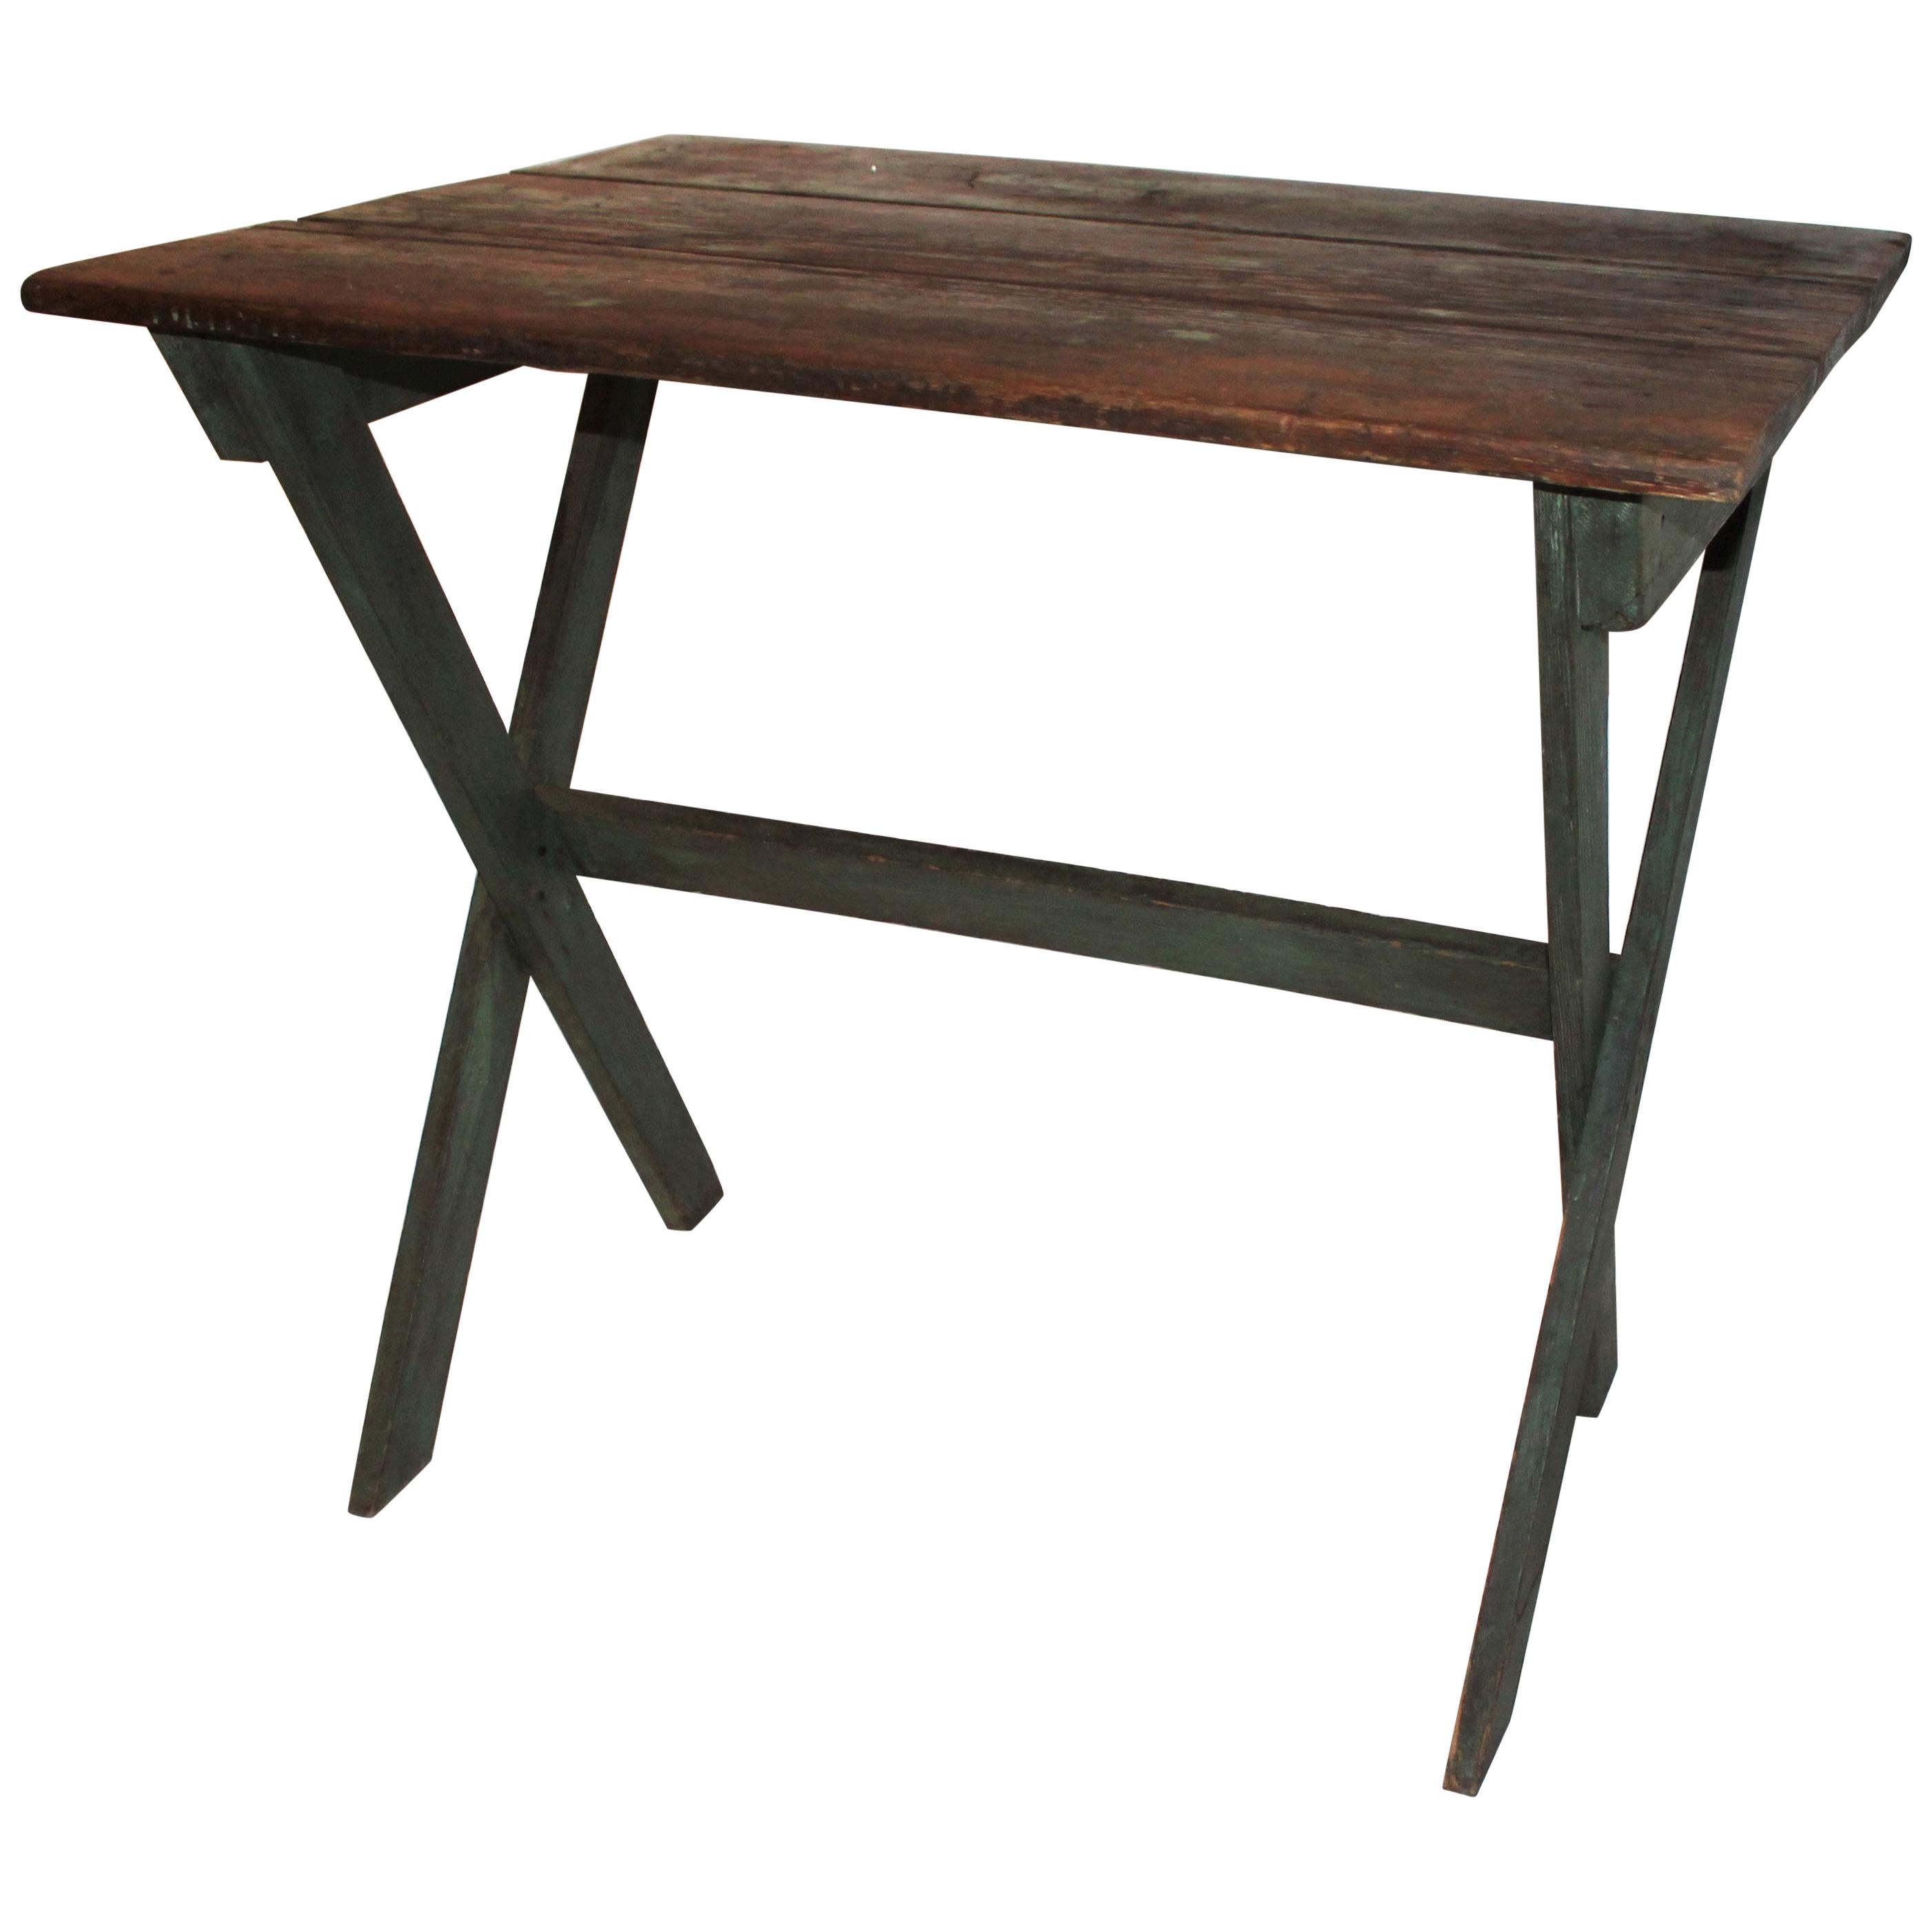 19th century original apple green painted sawbuck table. This rustic three board top table is all square nail construction. It was probably used as a work table on the farm or kitchen. It is in great sturdy condition.